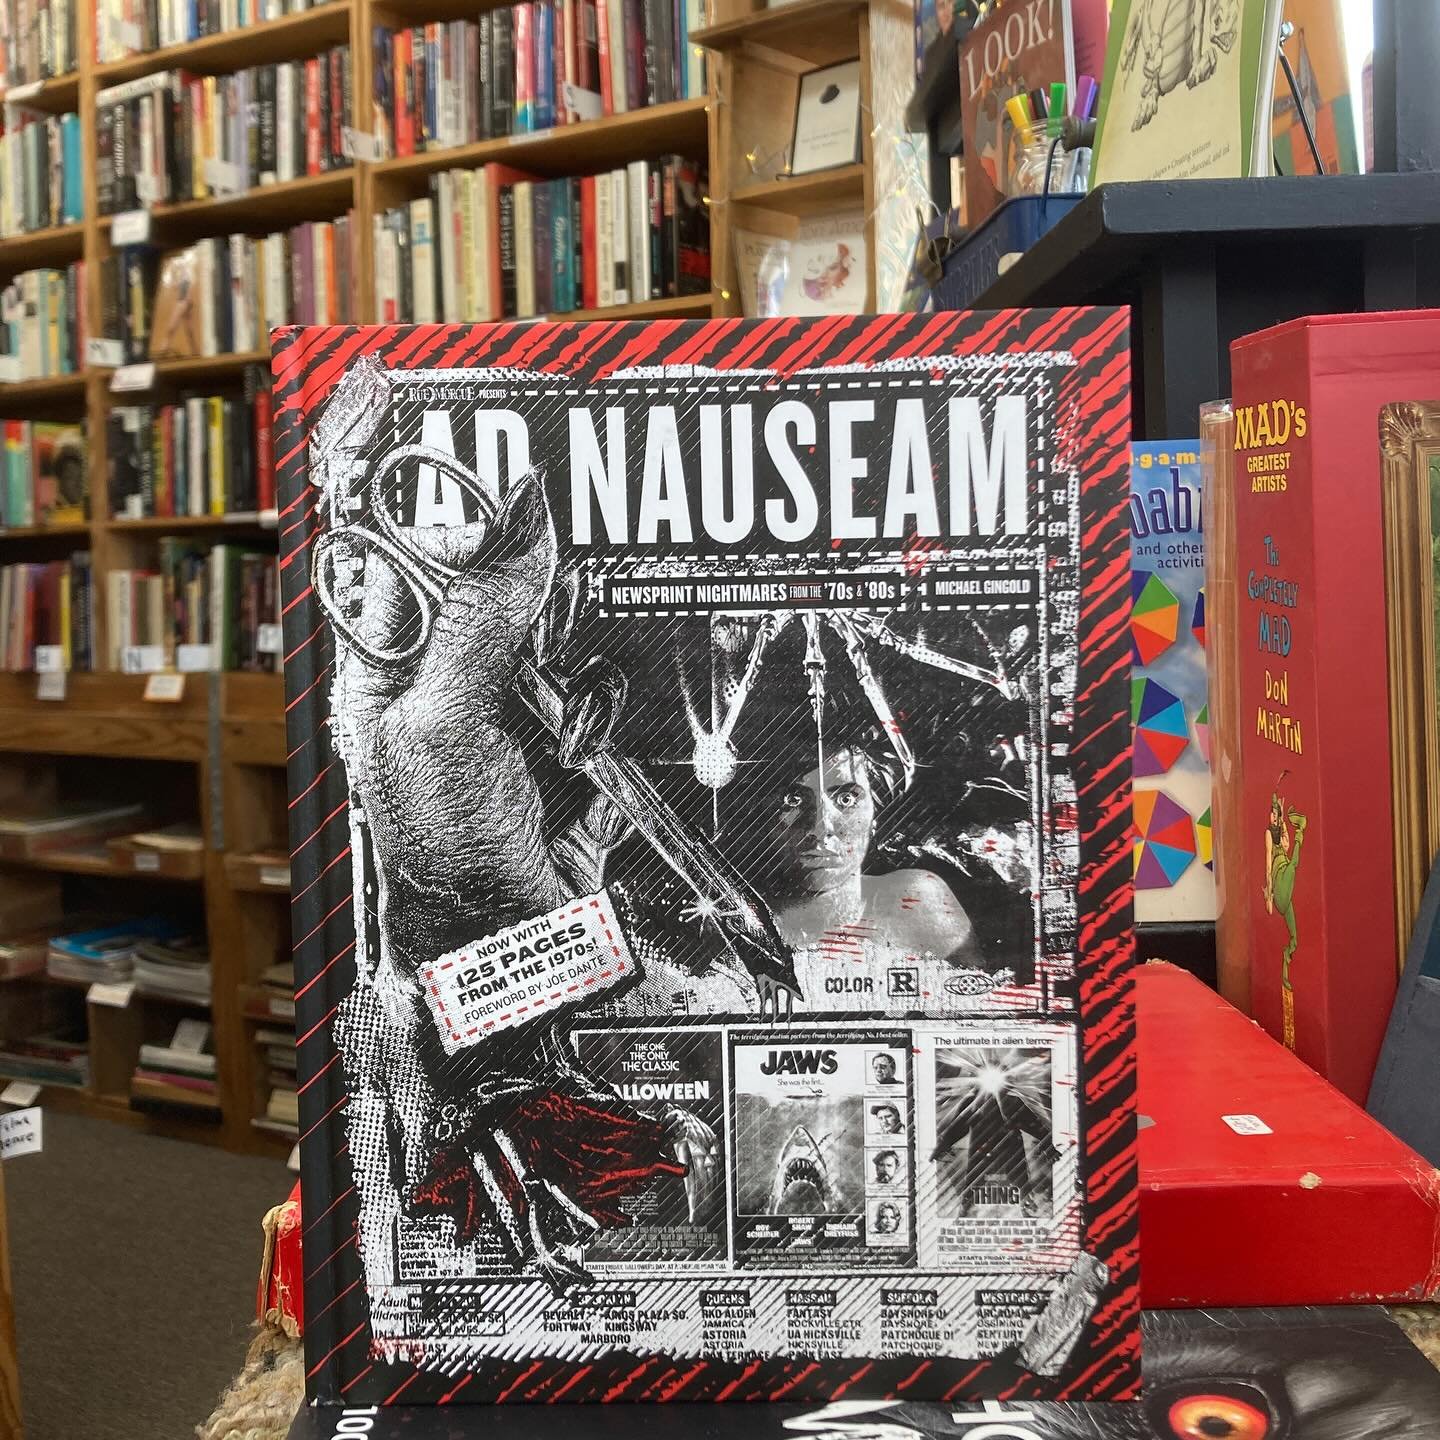 Ad Nauseam, Newsprint Nightmares from the &lsquo;70s &amp; &lsquo;80s, by Michael Gingold. Hardcover $25, on display in the front room